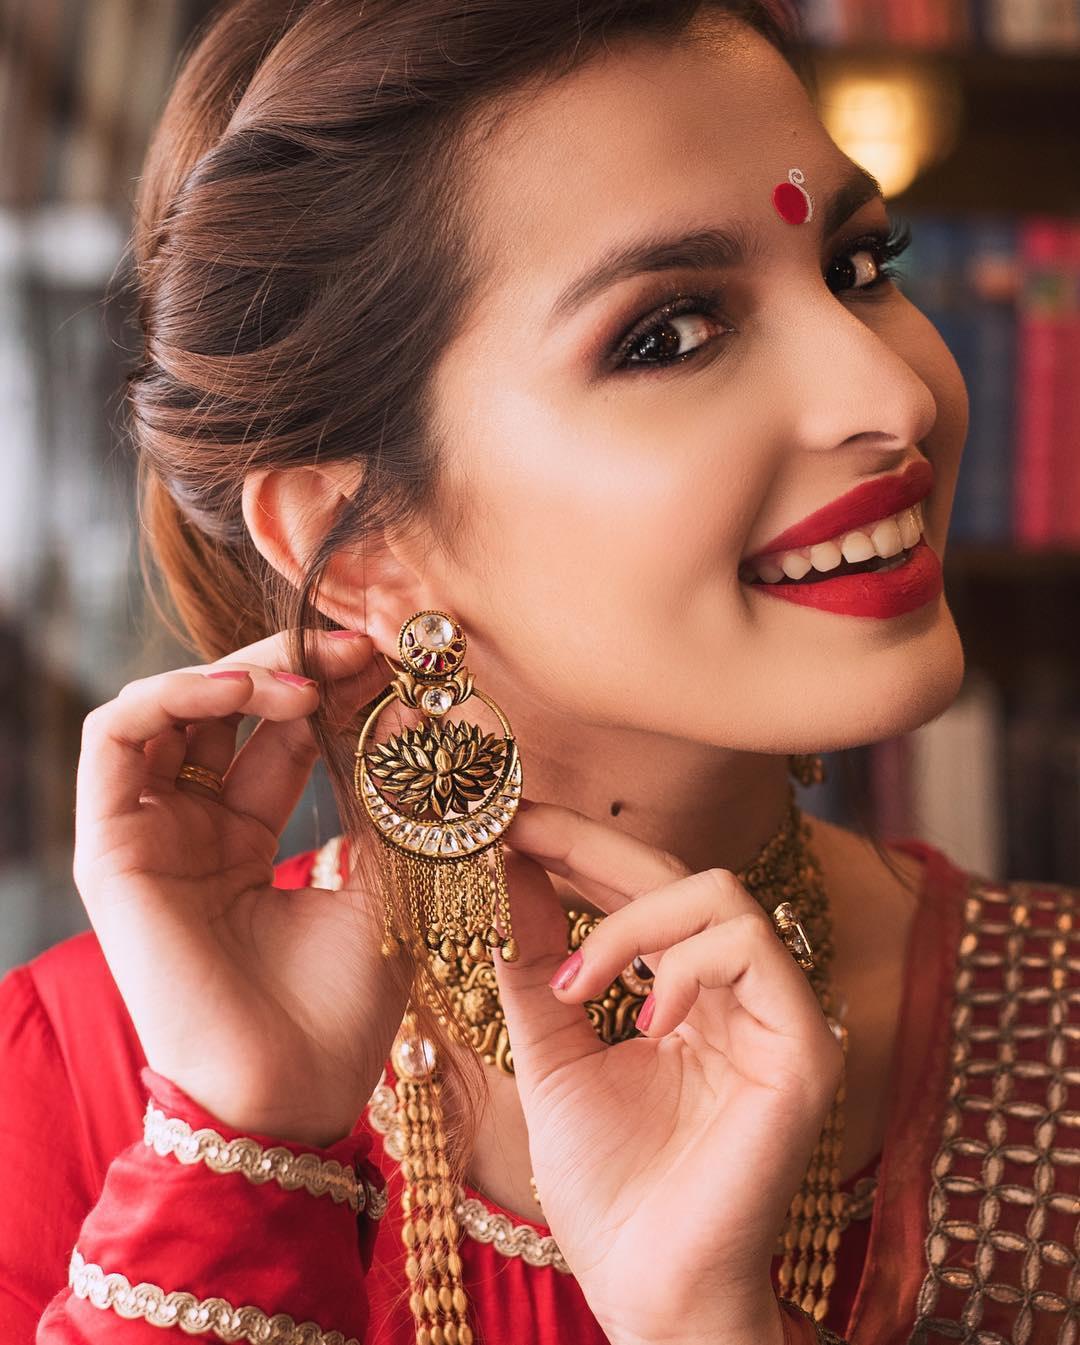 Stunning New Gold Earring Designs for Girls and Women